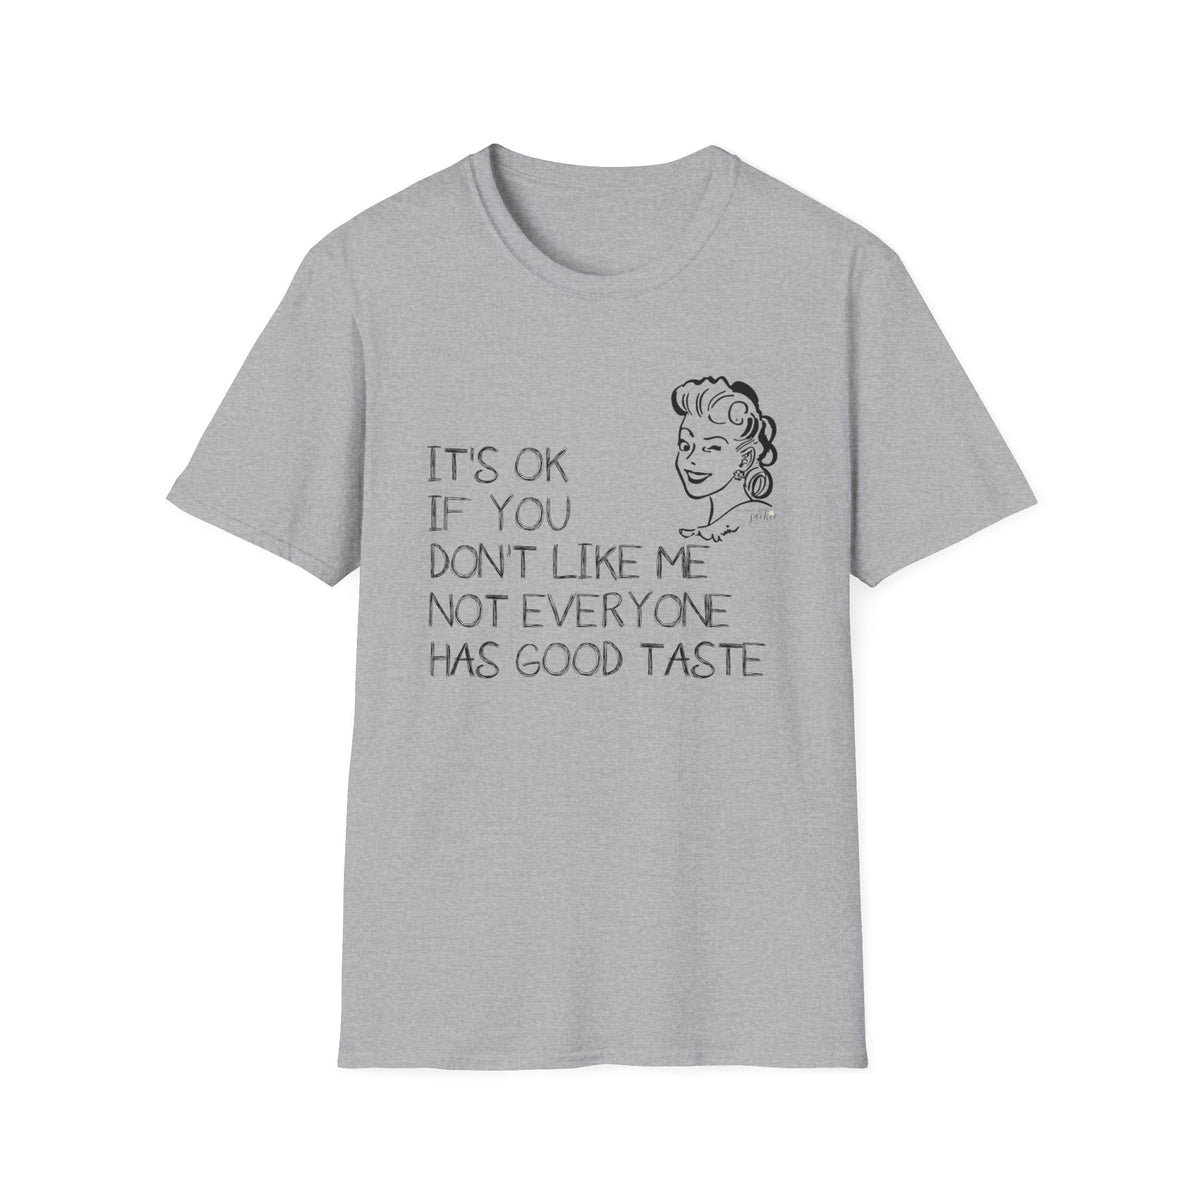 'It's OK if you don't like me' Unisex Softstyle T-Shirt